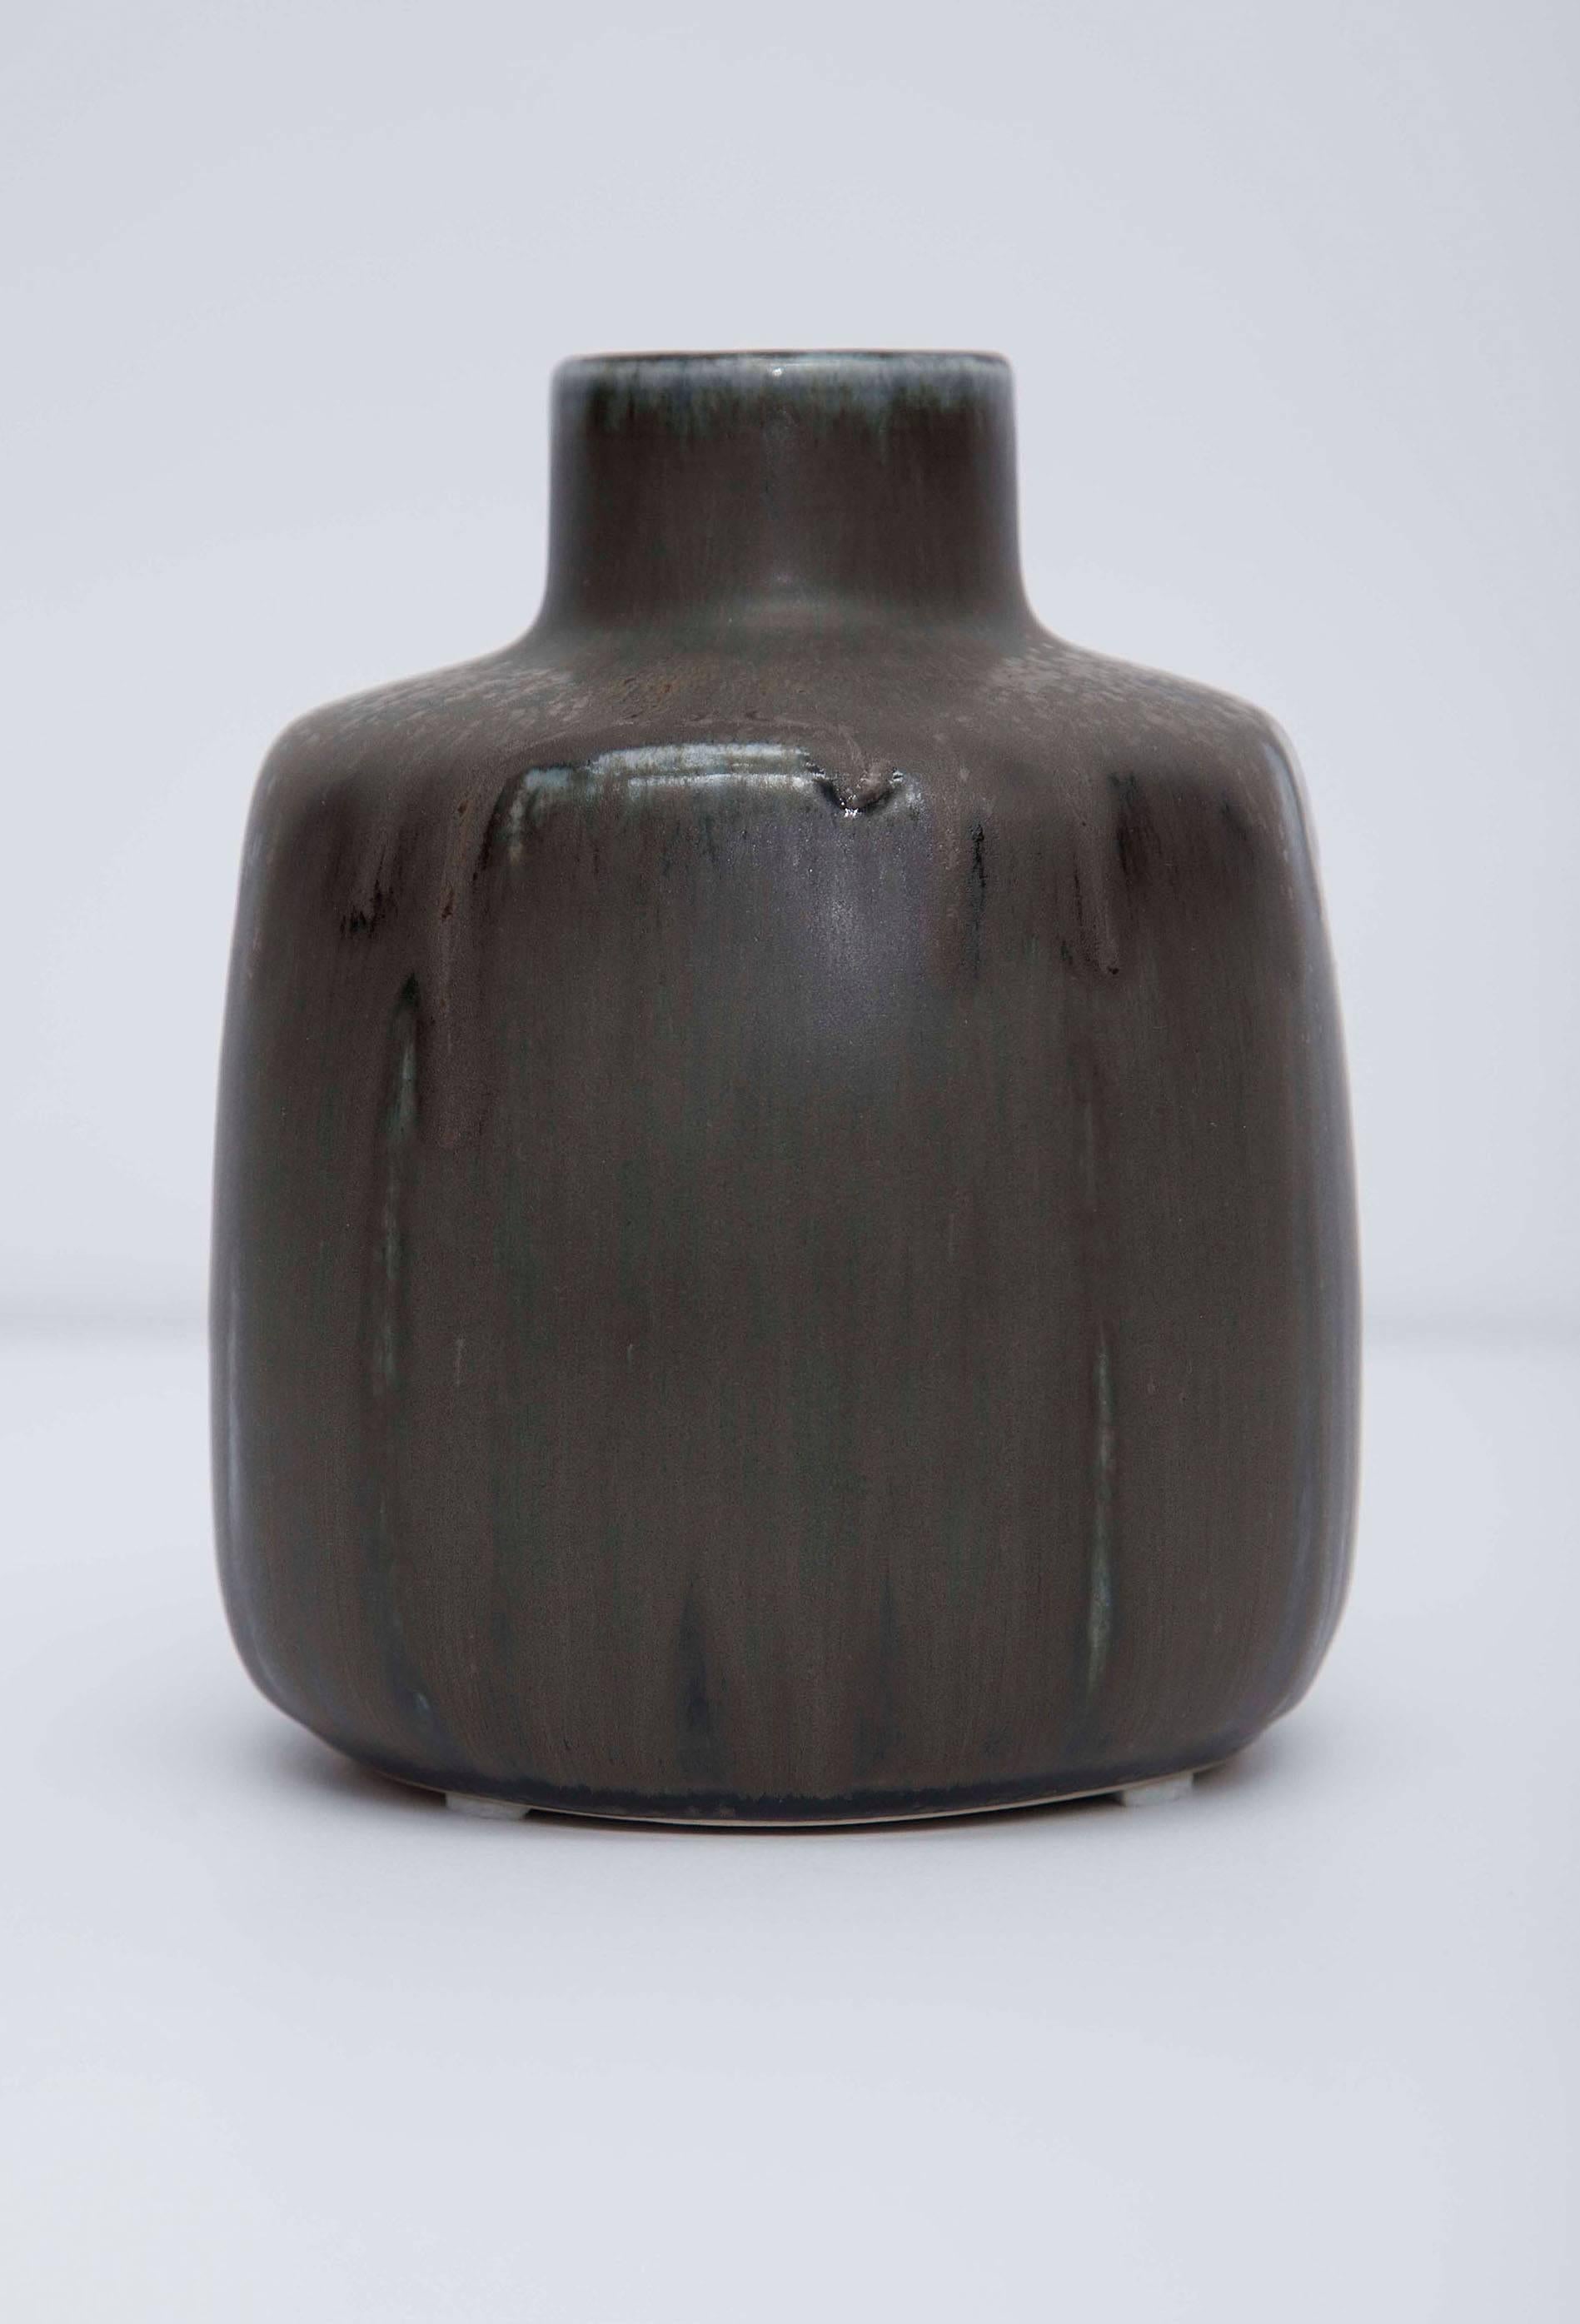 Stoneware Saxbo vase with dark brown and olive glaze by Eva Stæhr Nielsen. Rounded square body with circular raised opening. Impressed 